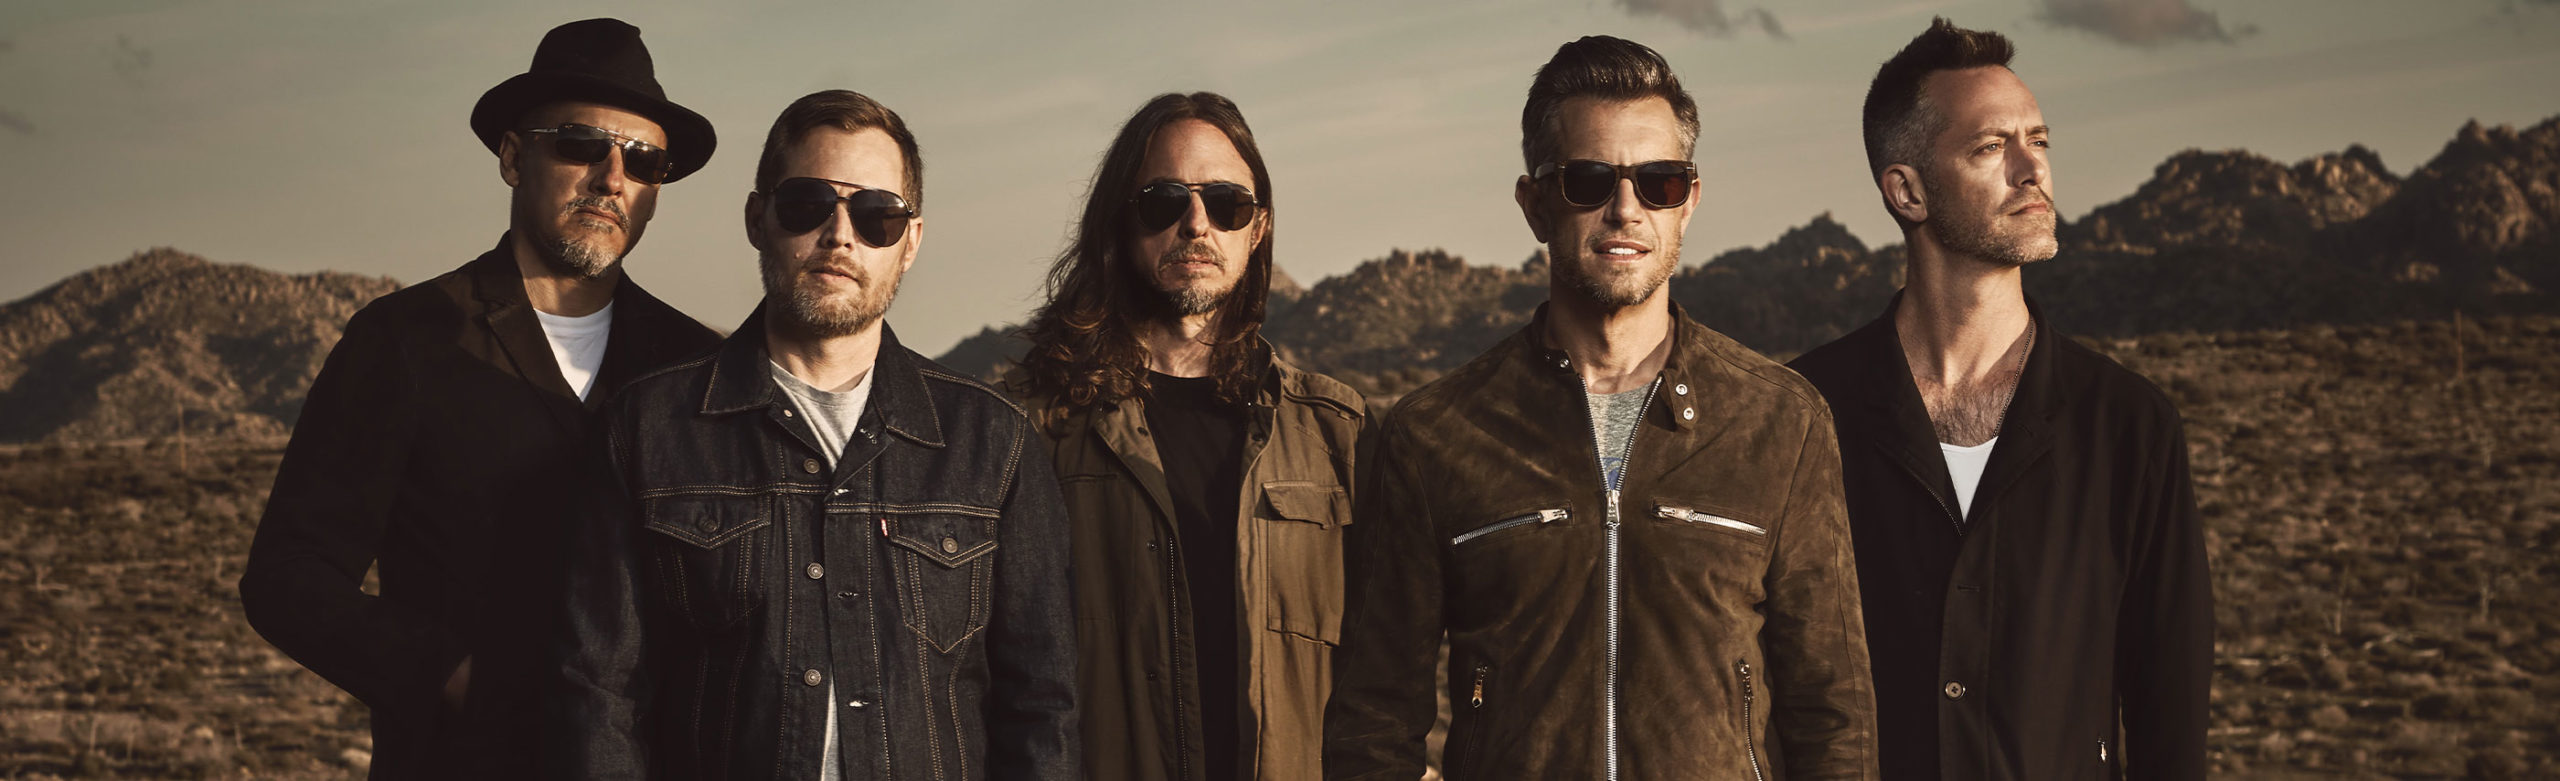 311 Celebrate 30th Anniversary, Add KettleHouse Amphitheater to 50 Dates in 50 States Tour Image